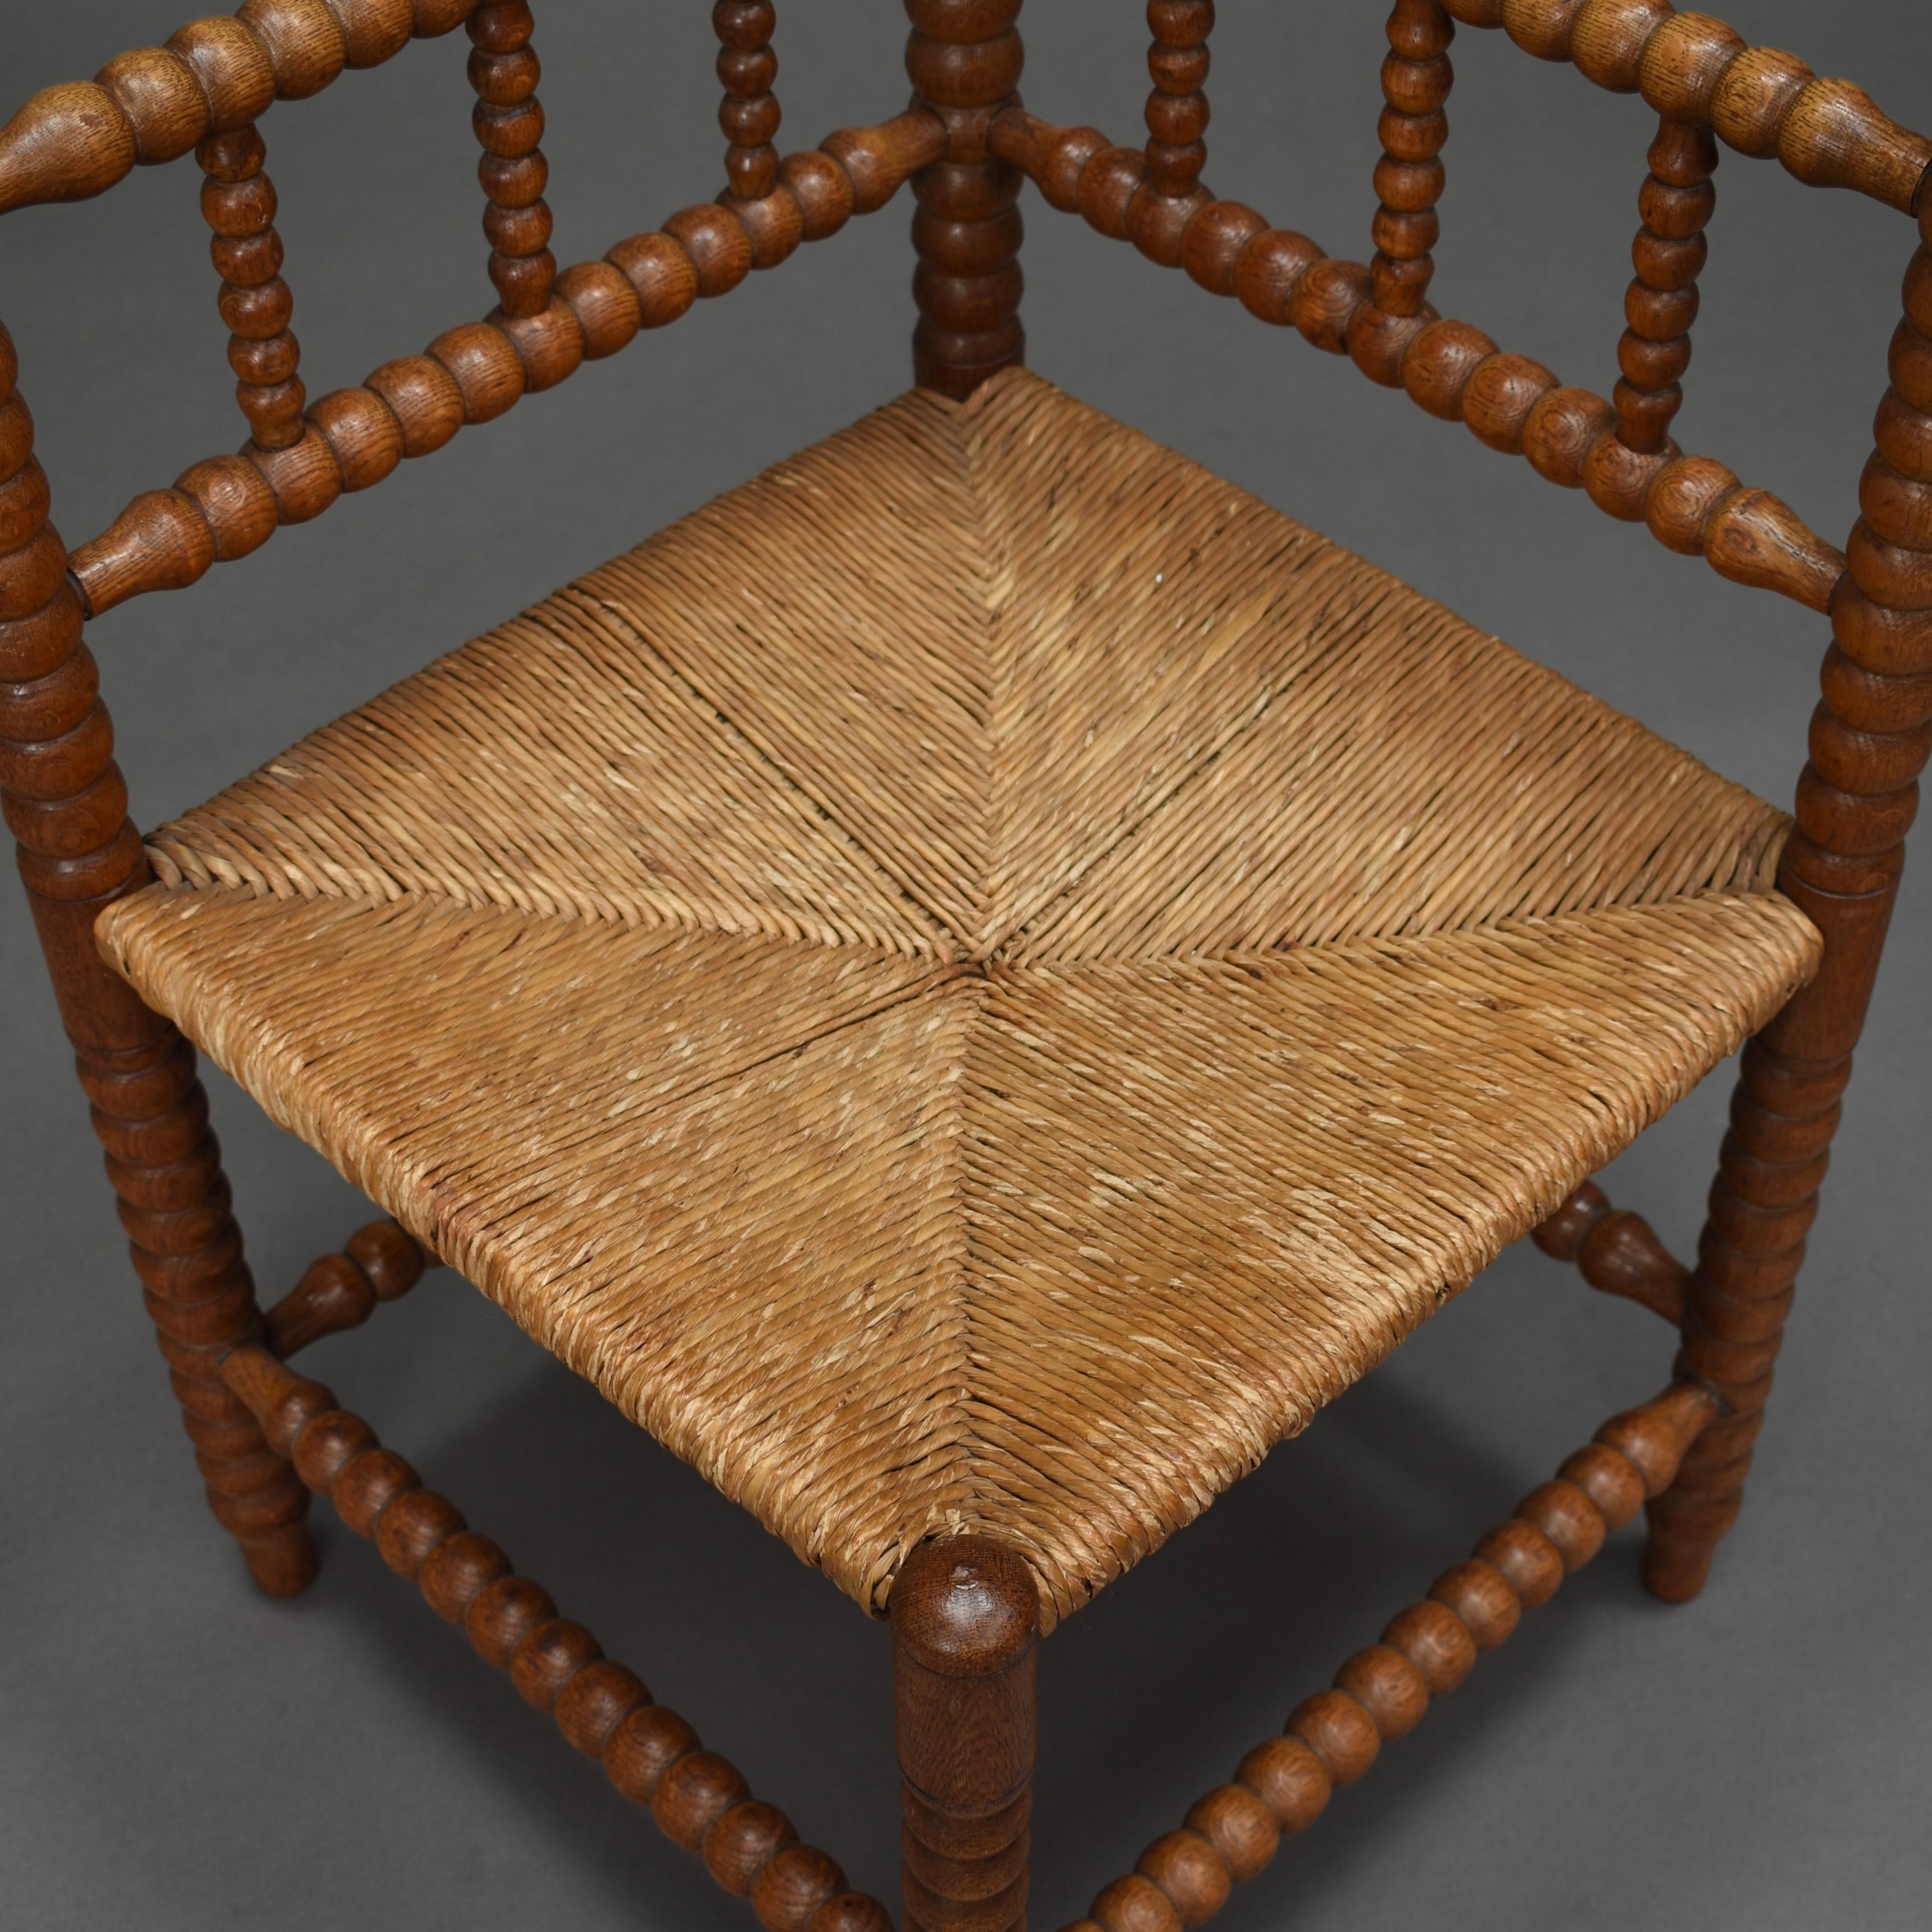 Stunning French solid turned oak wood corner chair with original woven cane seat, circa 1930-1940. In very good condition. One leg is slightly bent naturally. The chair is structurally sound and the cane seat is also in strong and good